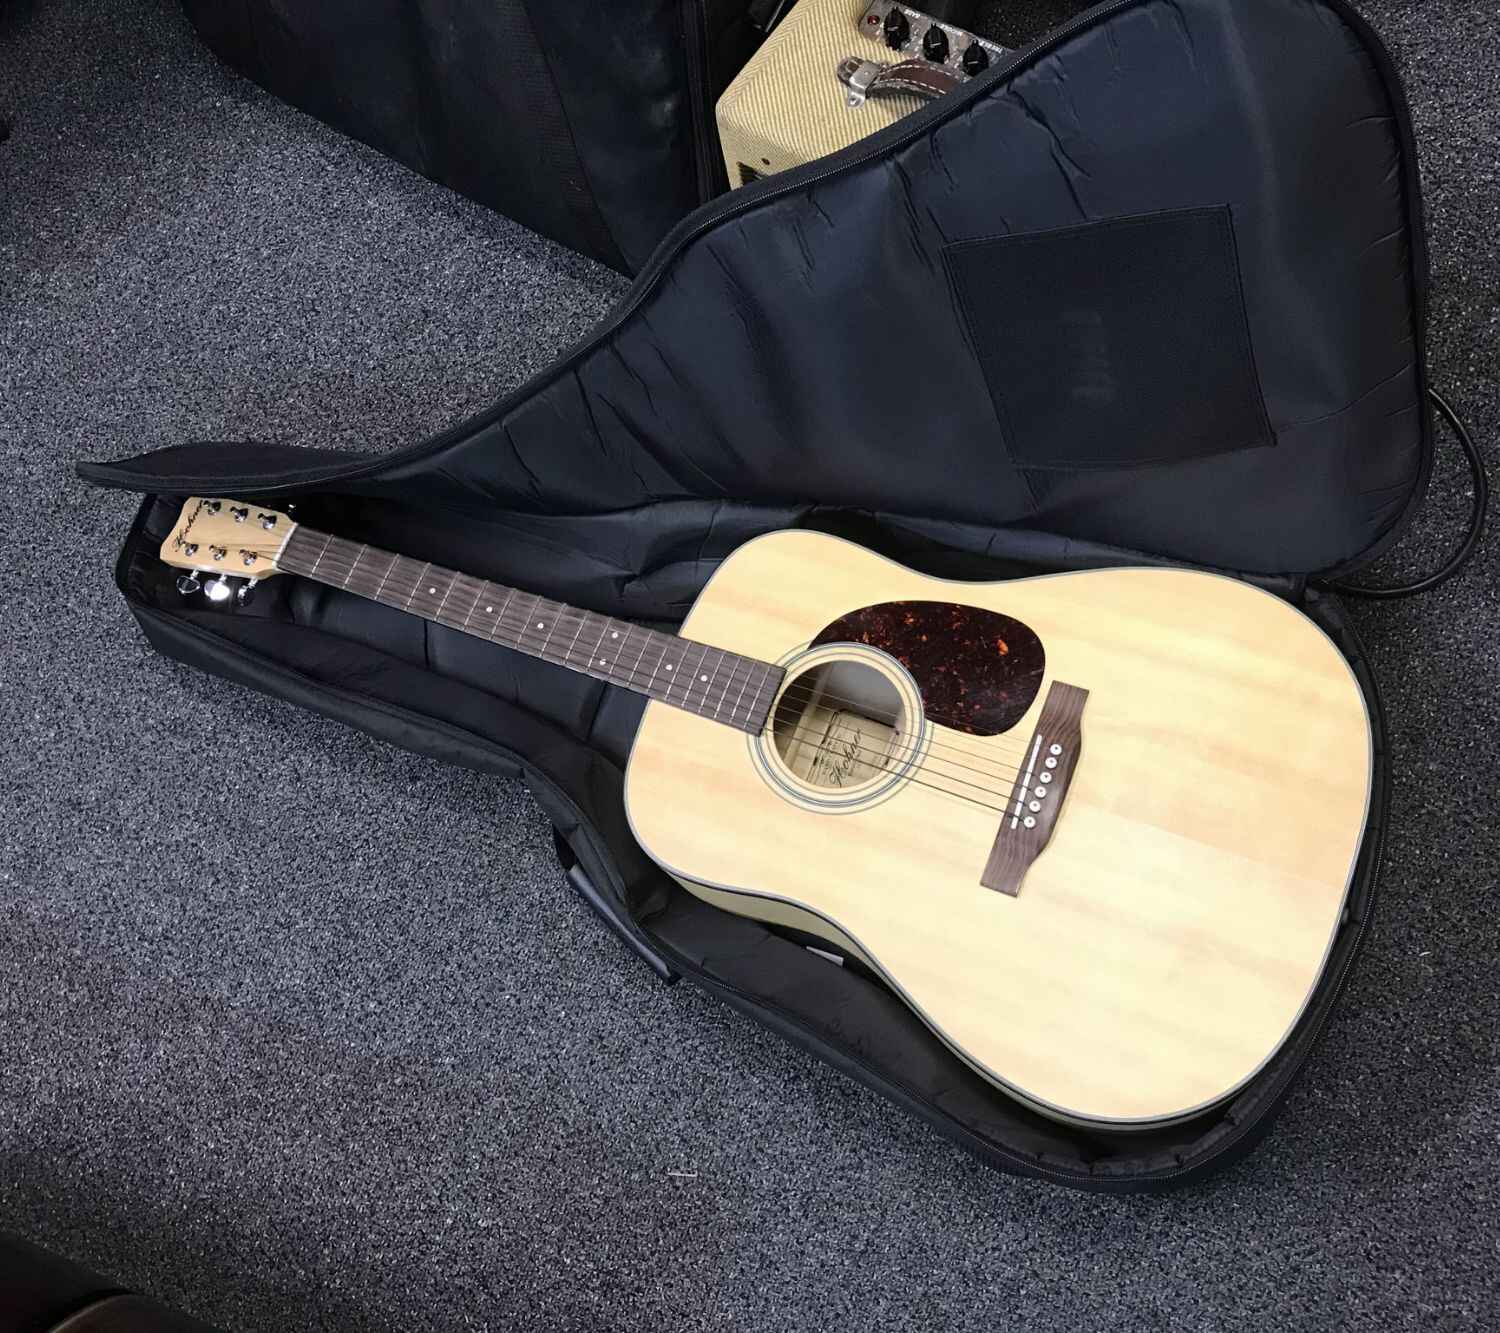 what-is-a-hohner-acoustic-guitar-worth